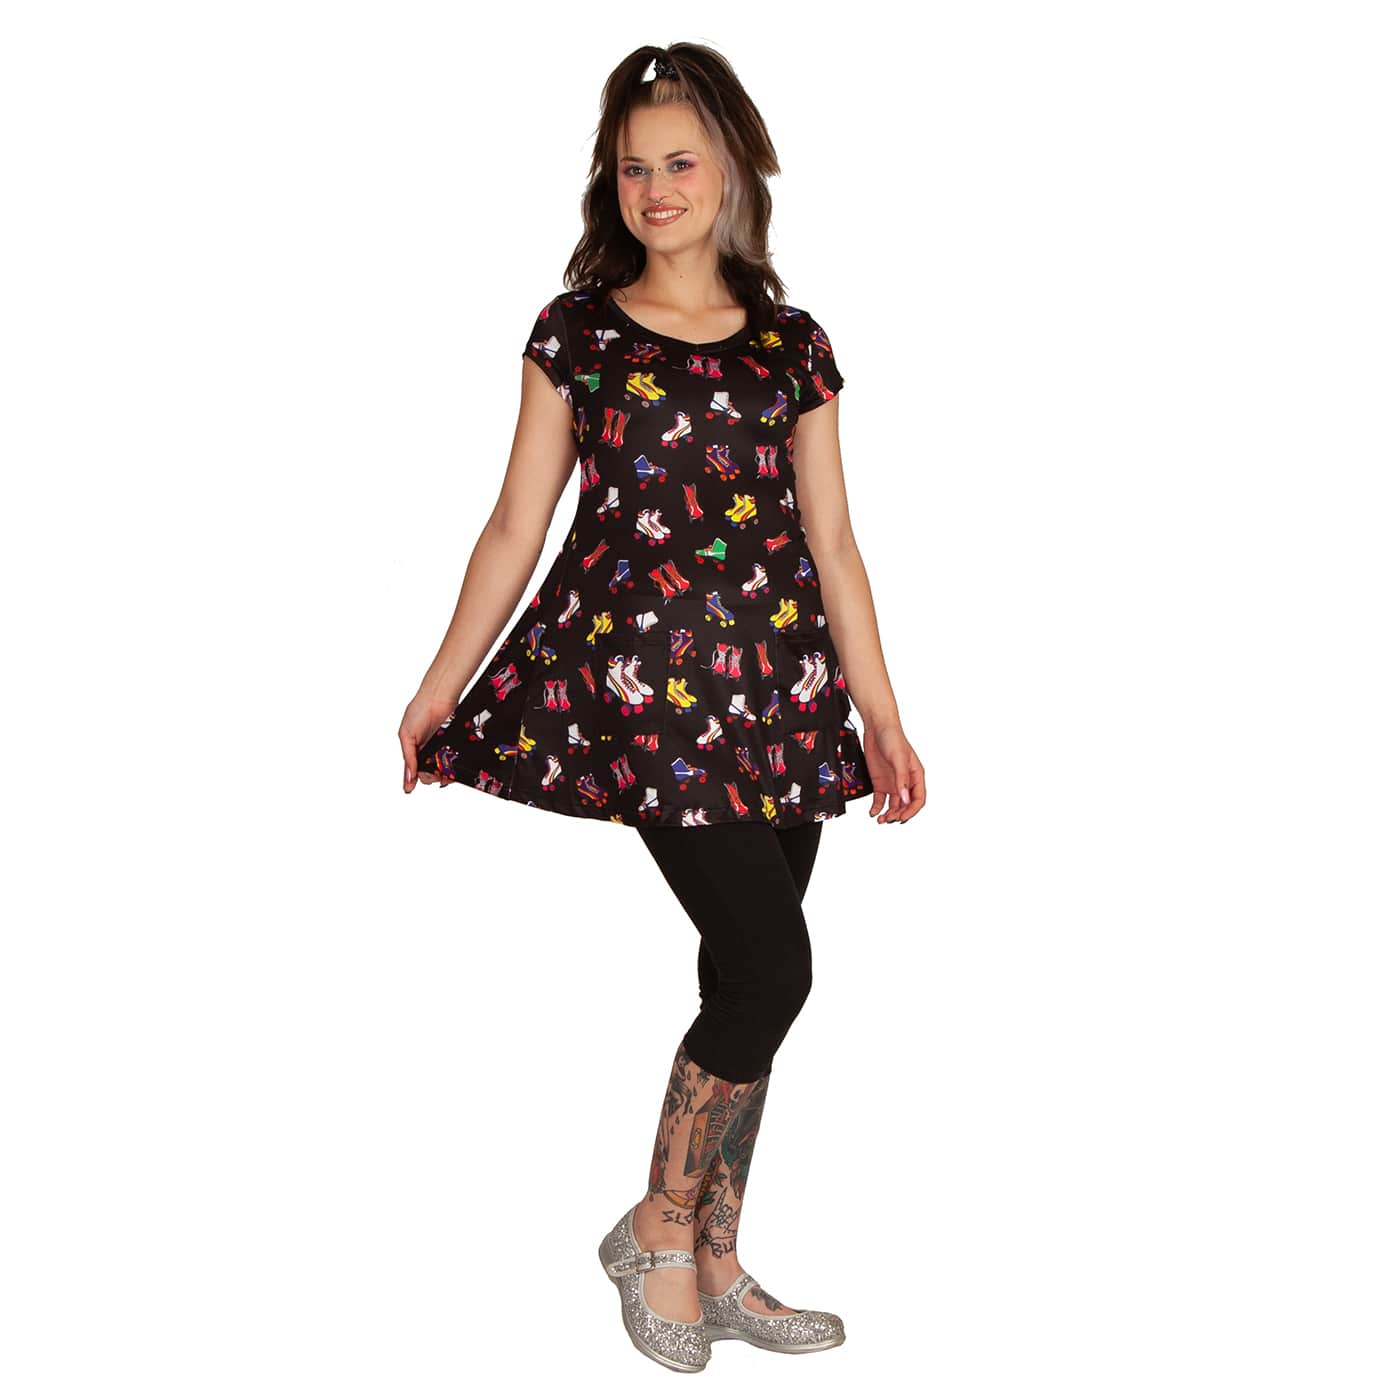 Retro Skates Tunic Top by RainbowsAndFairies.com.au (Roller Skates - Roller Derby - Mod - Retro - Top With Pockets - Vintage Inspired - Kitsch) - SKU: CL_TUNIC_RETRO_ORG - Pic-06